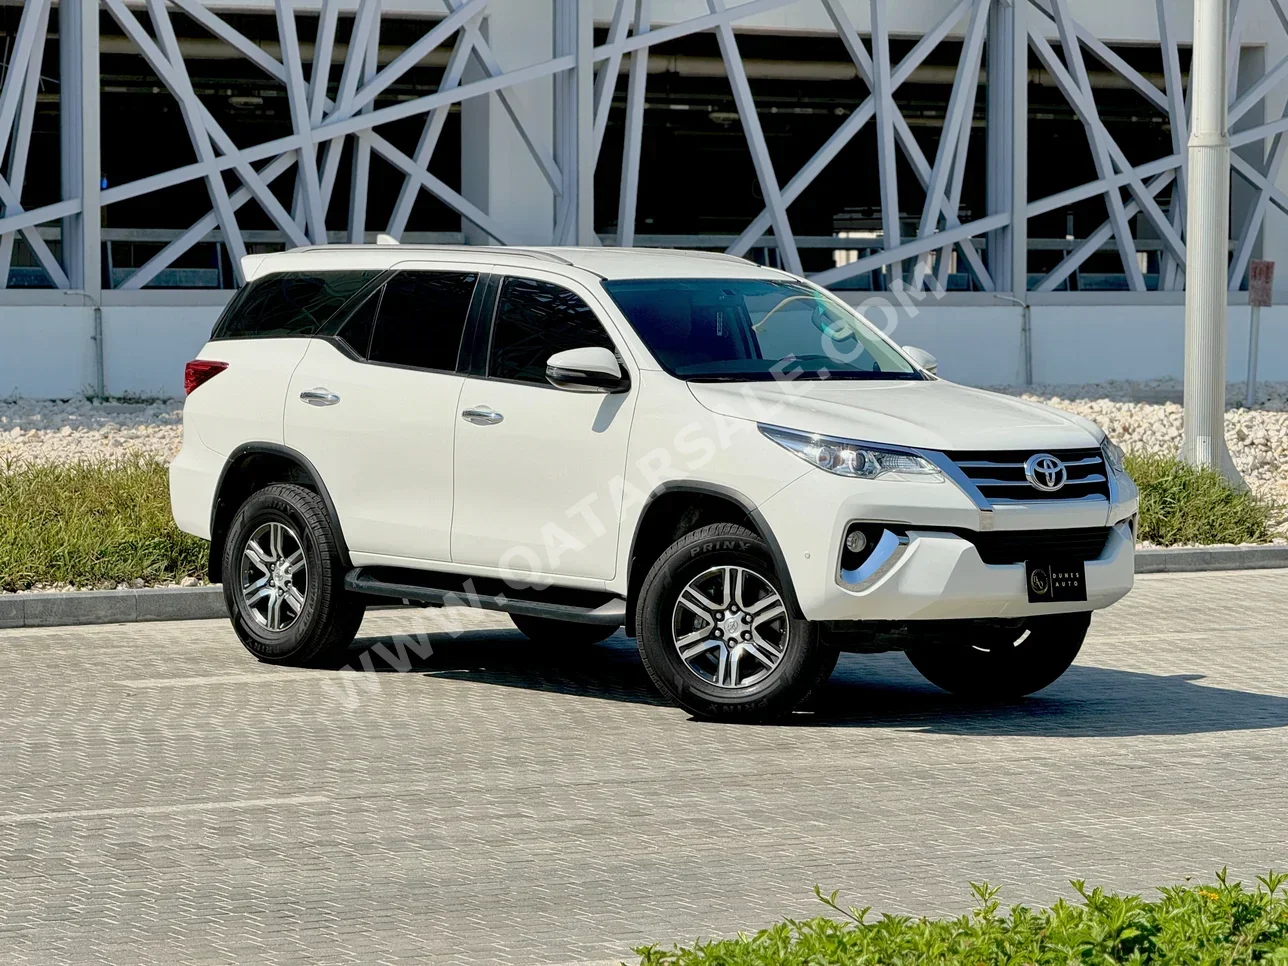 Toyota  Fortuner  2020  Automatic  67,000 Km  4 Cylinder  Four Wheel Drive (4WD)  SUV  White